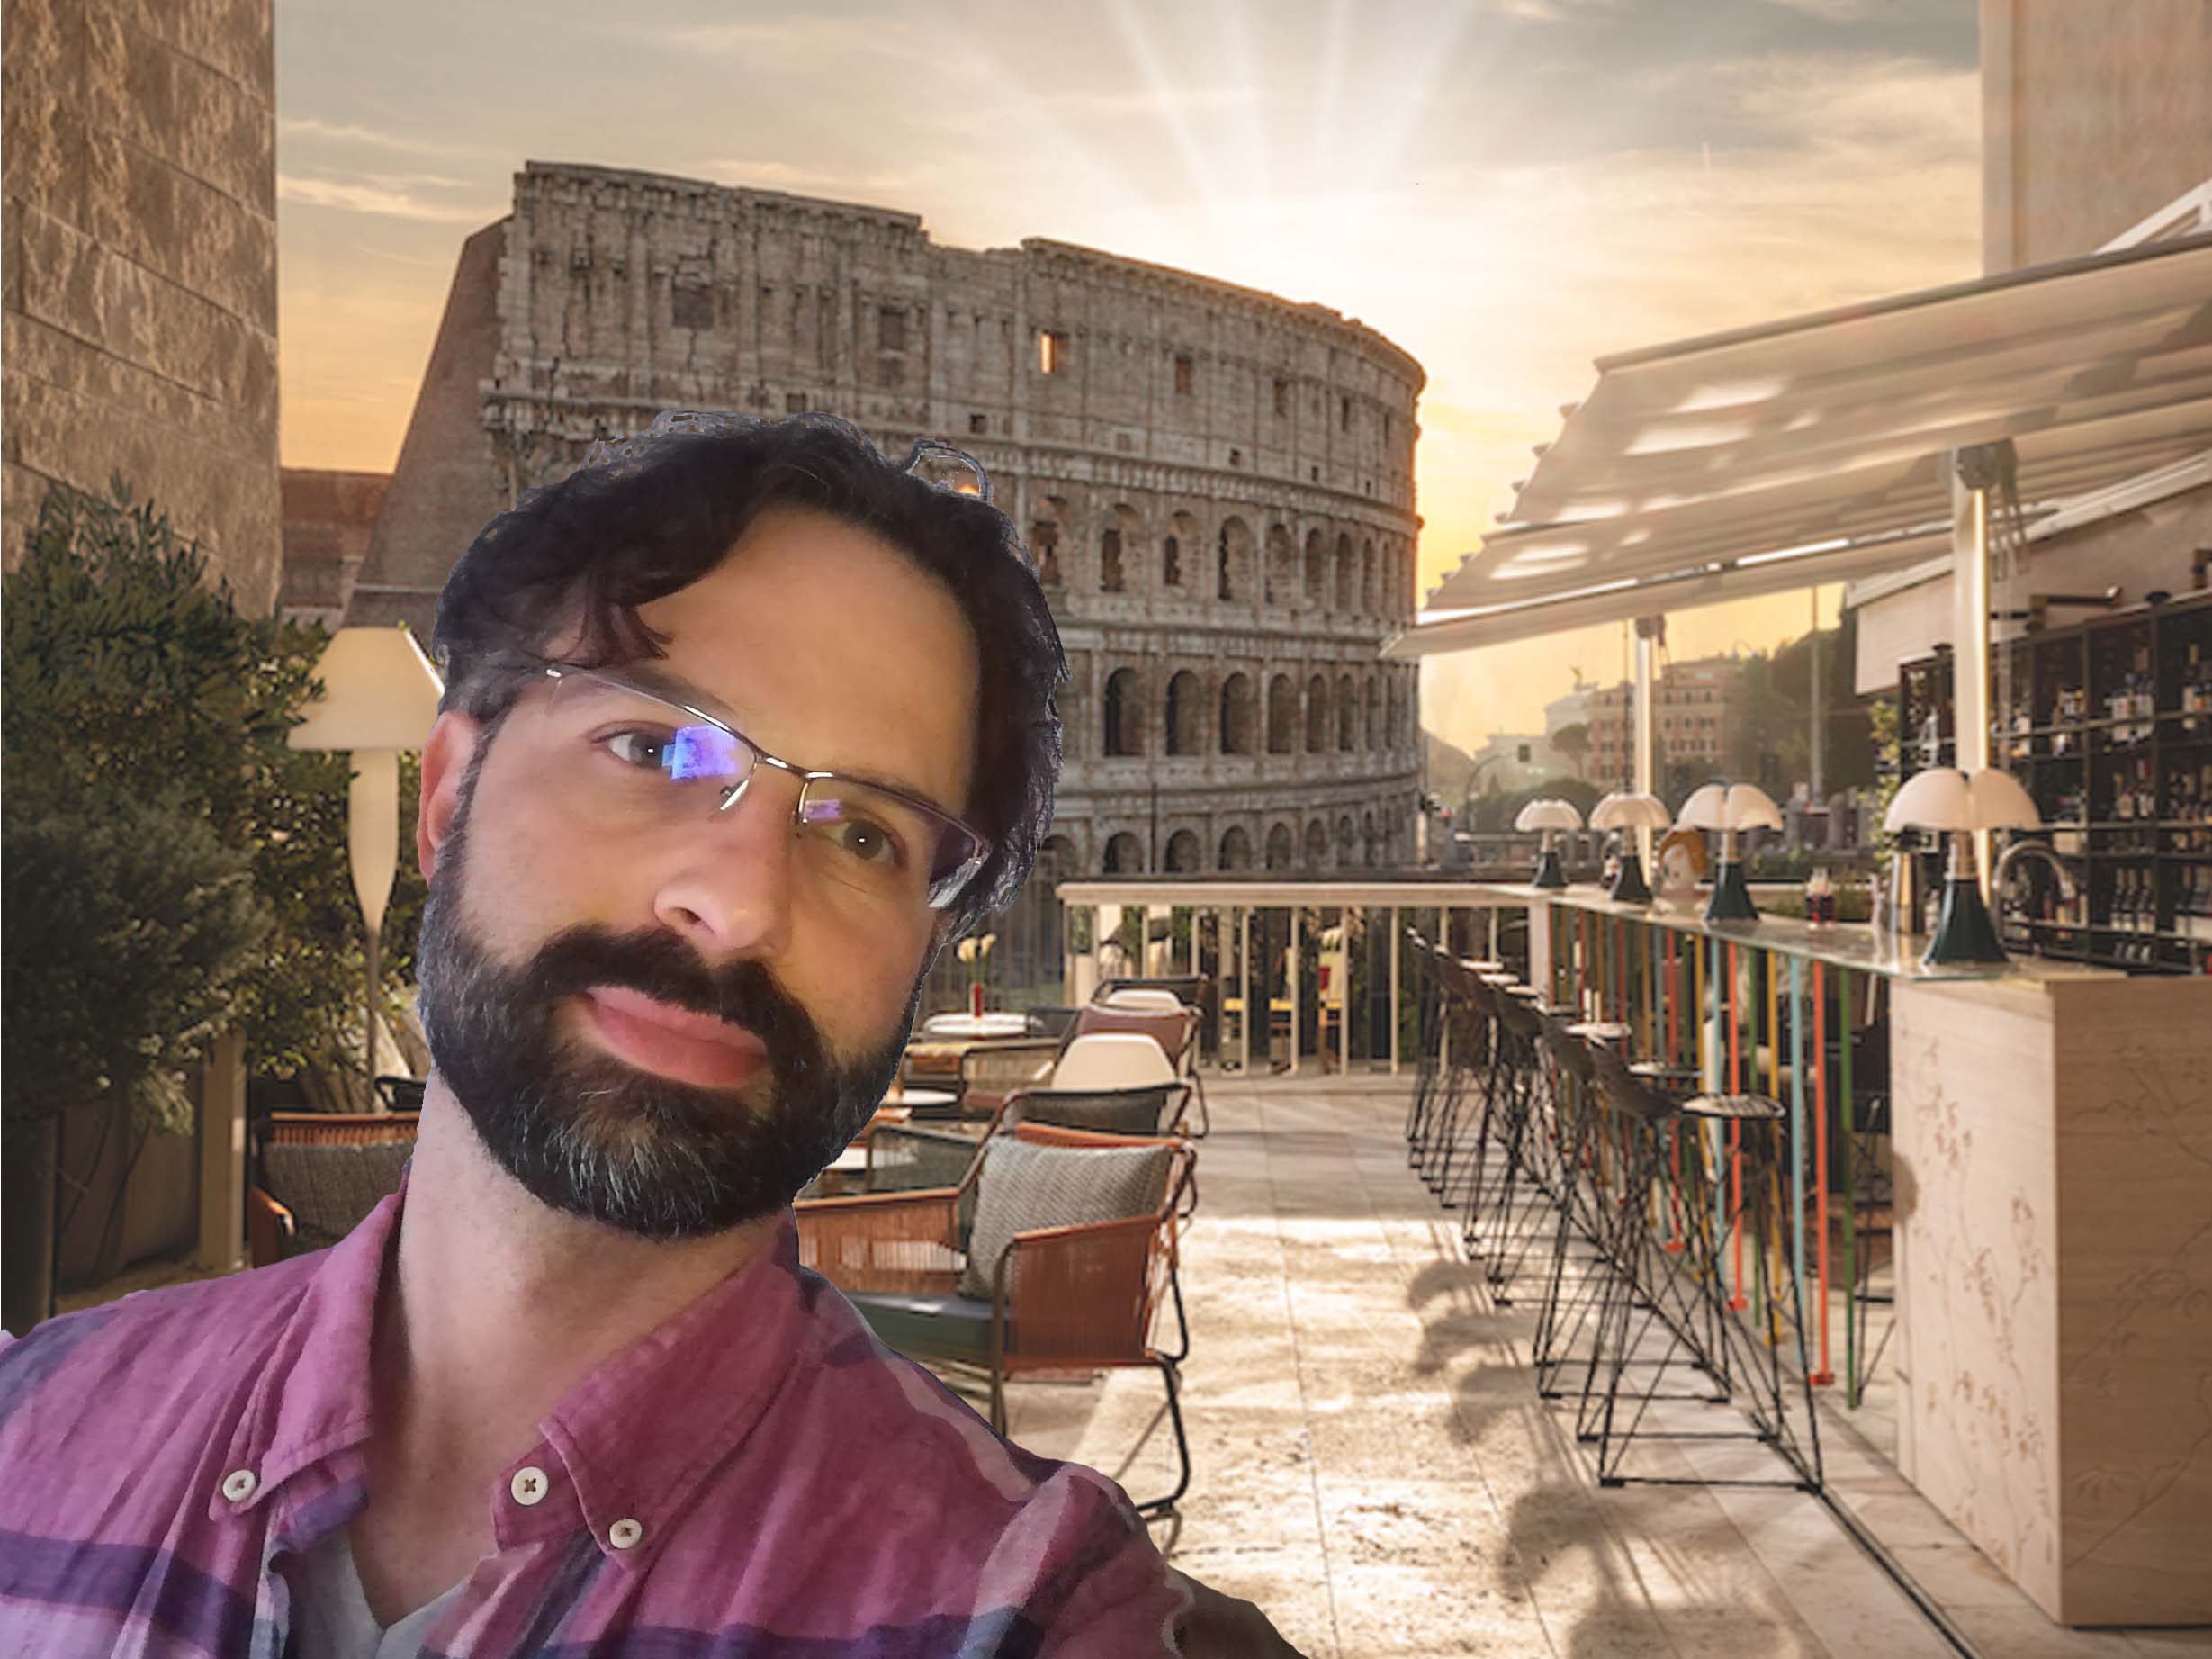 Alberto, passionate Italian tutor, creating an immersive learning experience in an Italian café